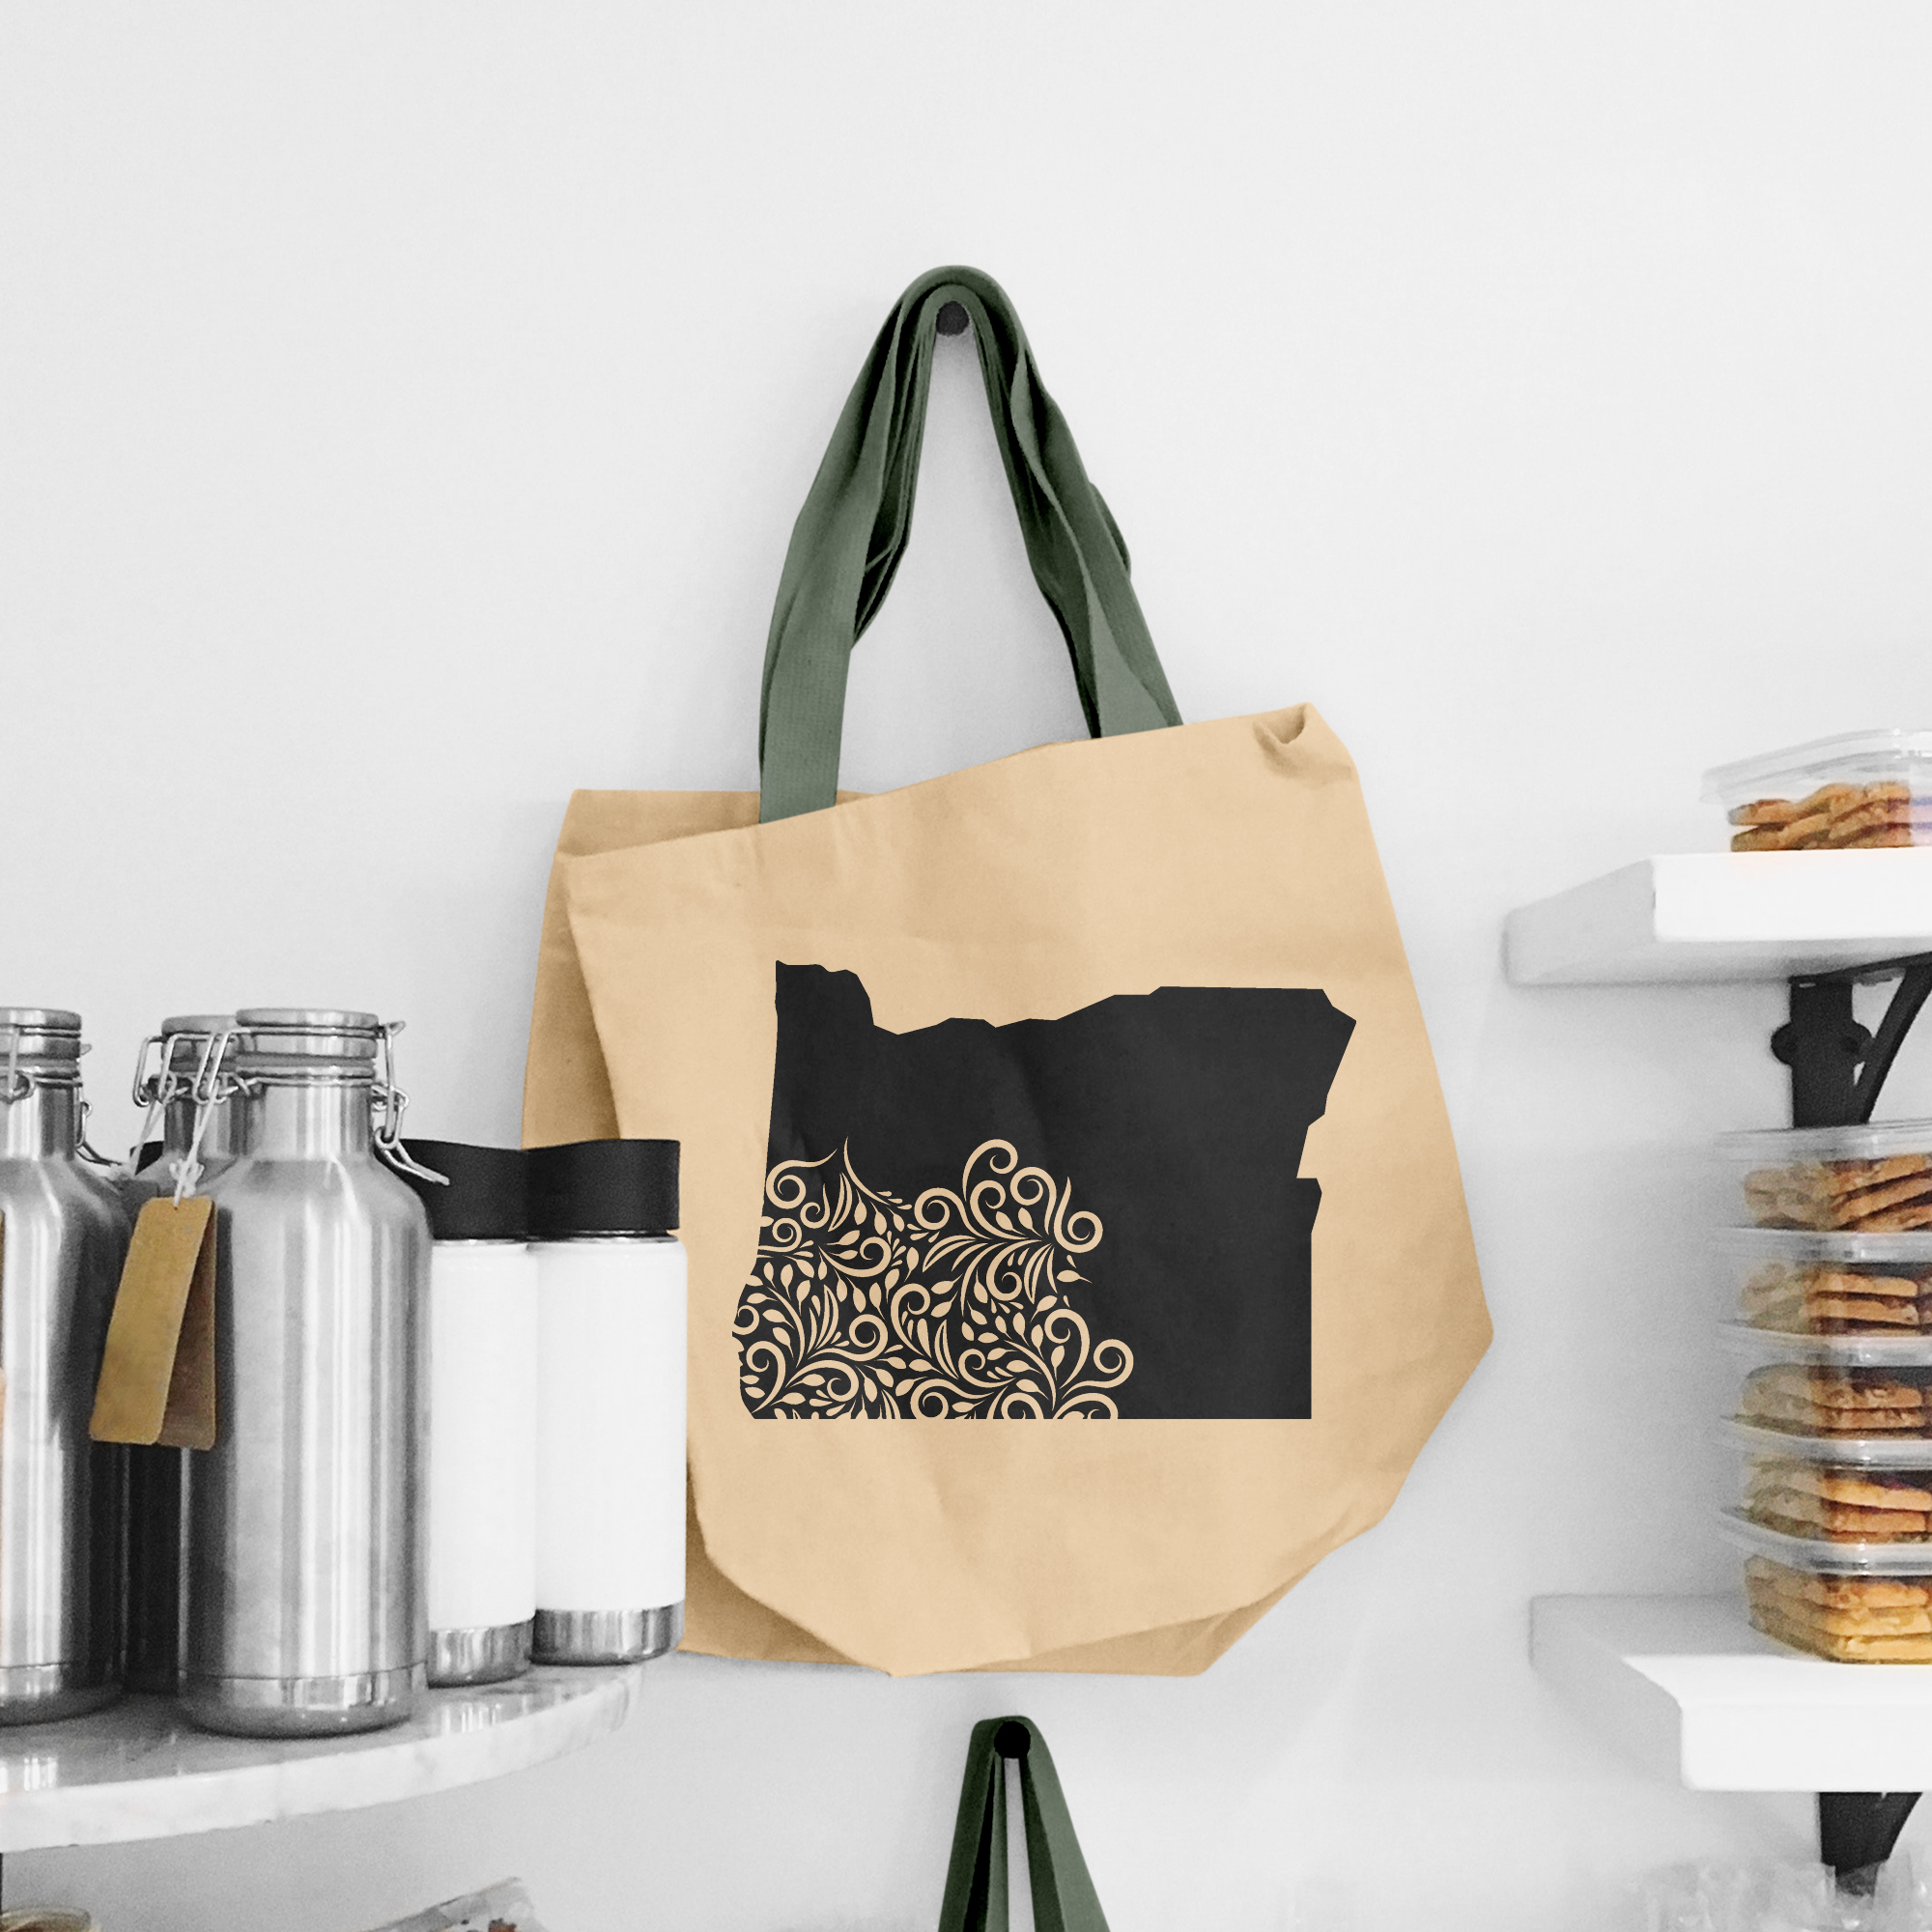 Black illustration of map of Oregon on the beige shopping bag with dirty green handle.